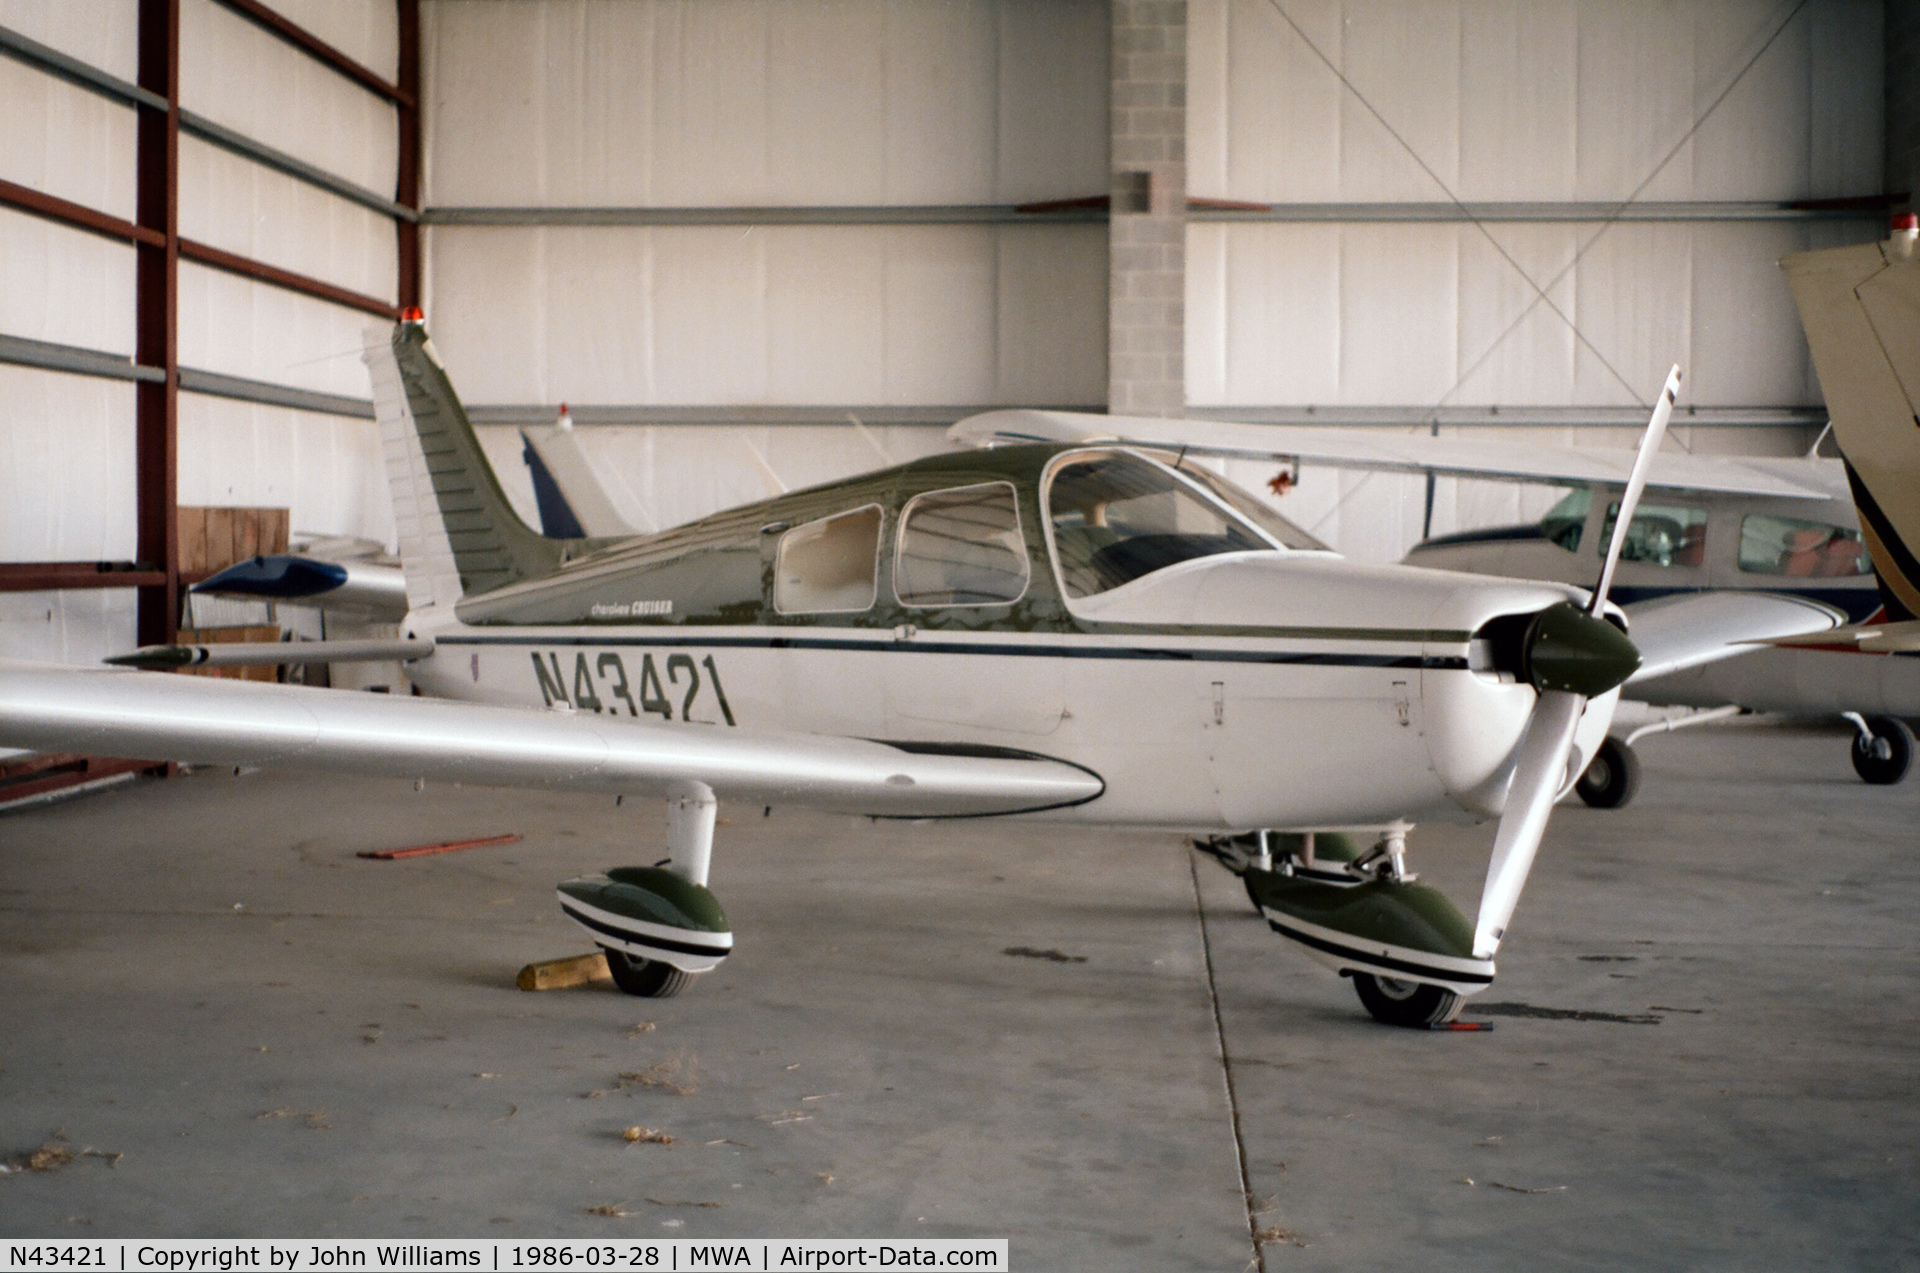 N43421, 1974 Piper PA-28-140 C/N 28-7425365, Marion, IL 03/28/1986